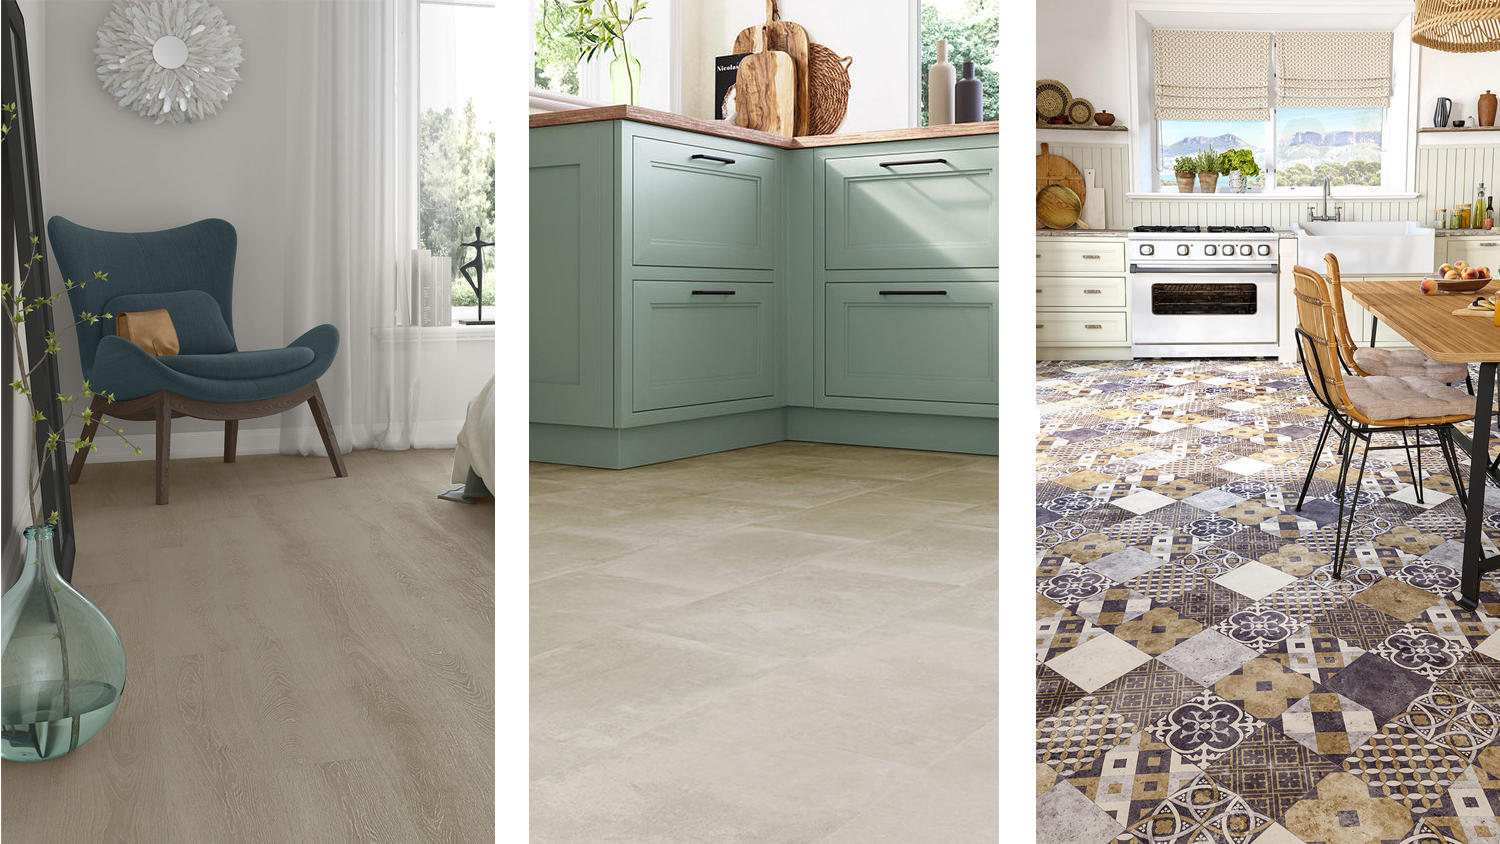 Where consumer preference is the priority: Flooring options